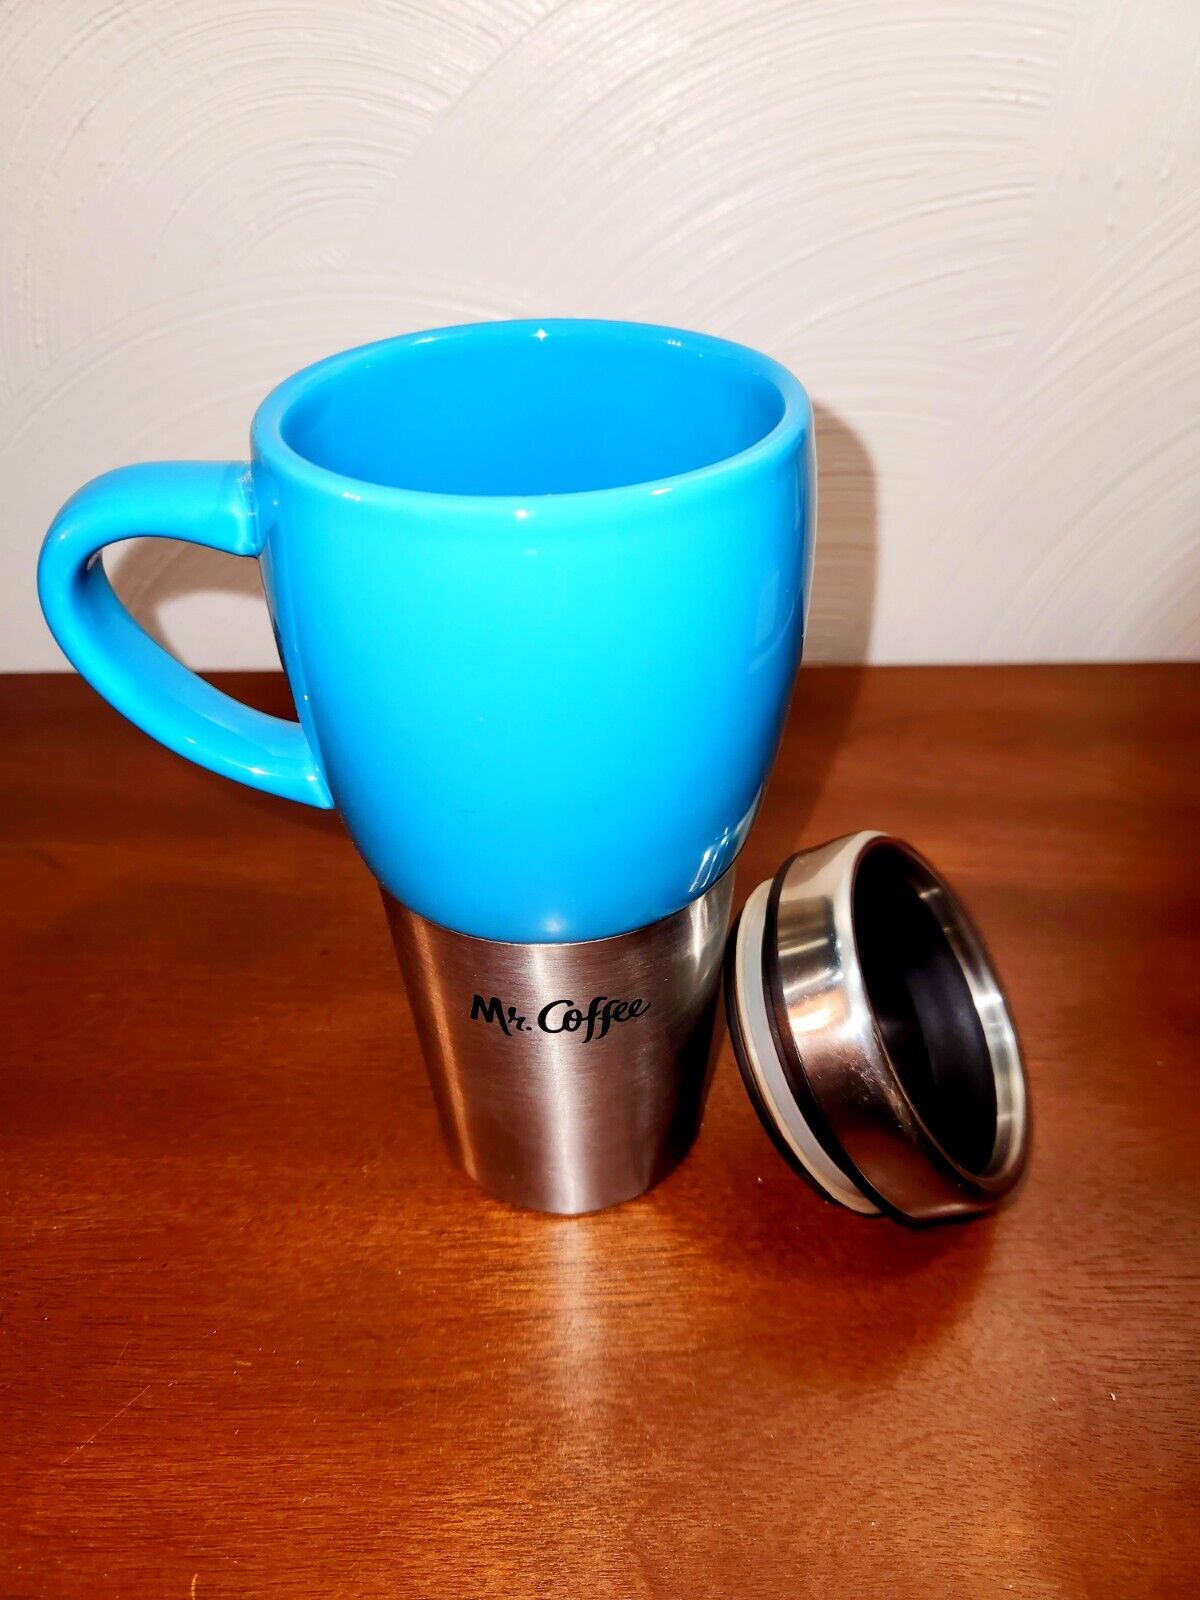 Mr. Coffee Teal Blue Ceramic/Stainless Travel Mug Cup Tumbler with Lid Very Nice